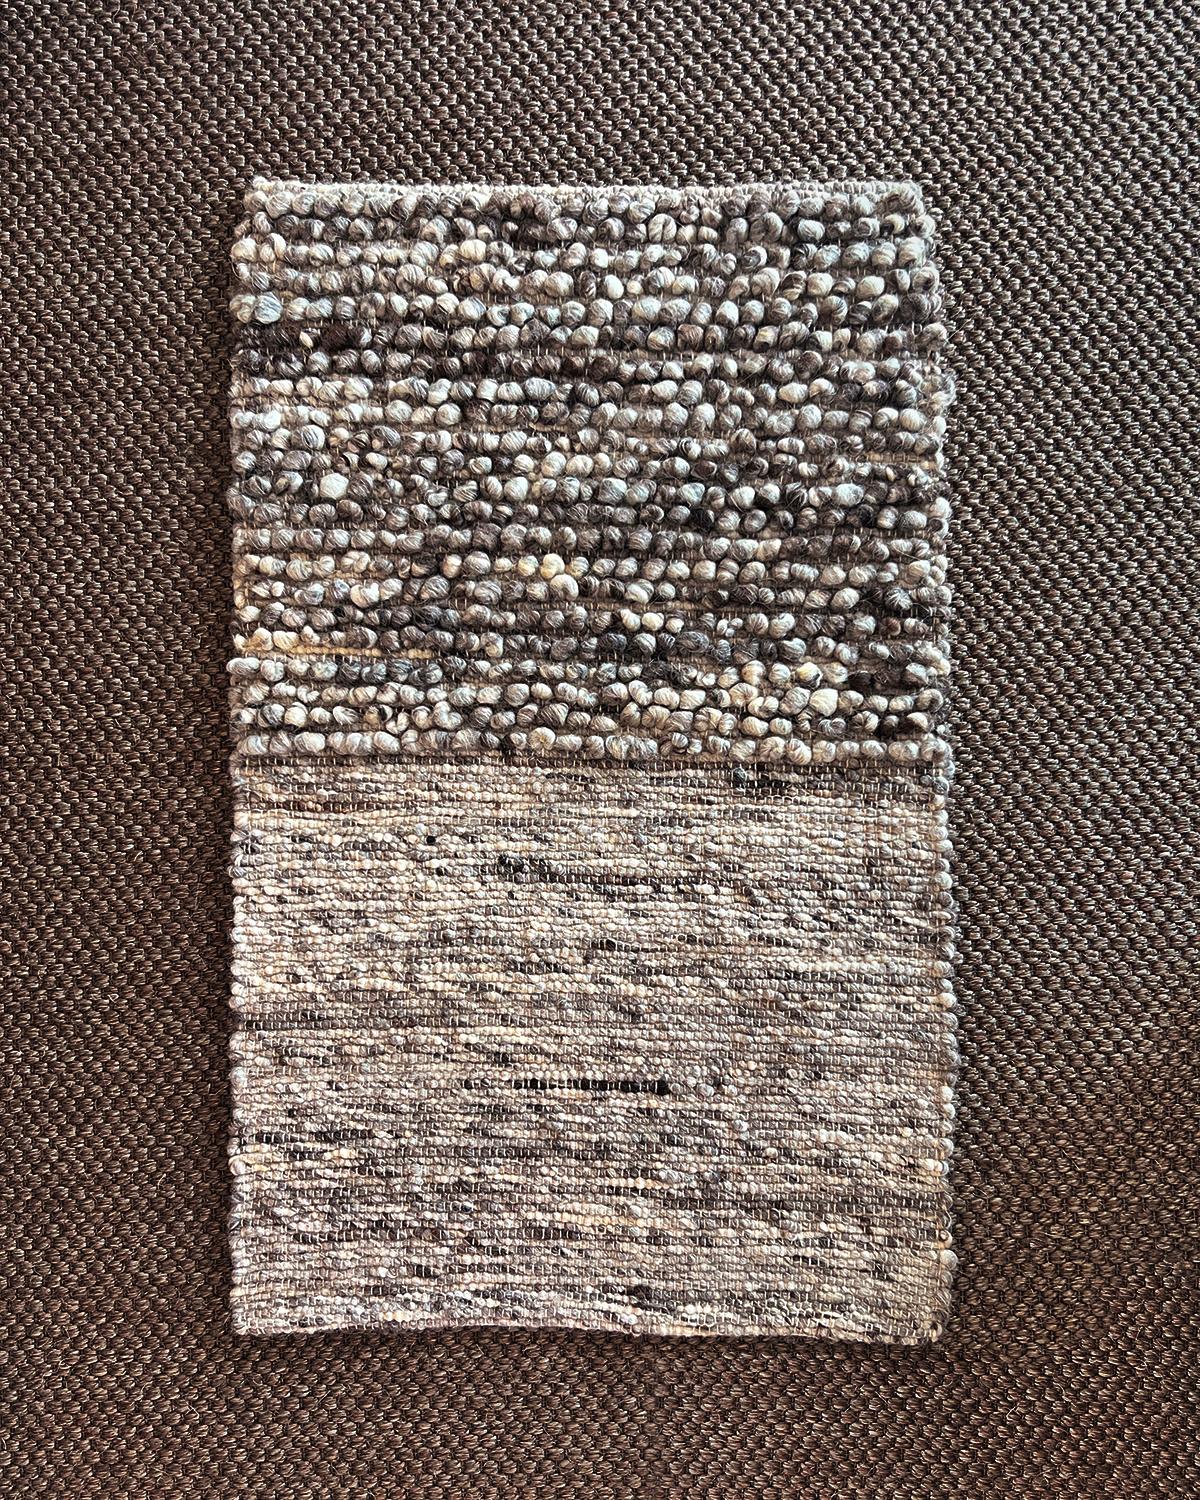 A cozy textured wool rug to warm up your home. Elevate your living space with the Fatima Nubby Wool Area Rug. Handmade with 100% wool from Portugal, its unique nubby texture adds an organic modern touch to any room. Woven with wool in stylish shades